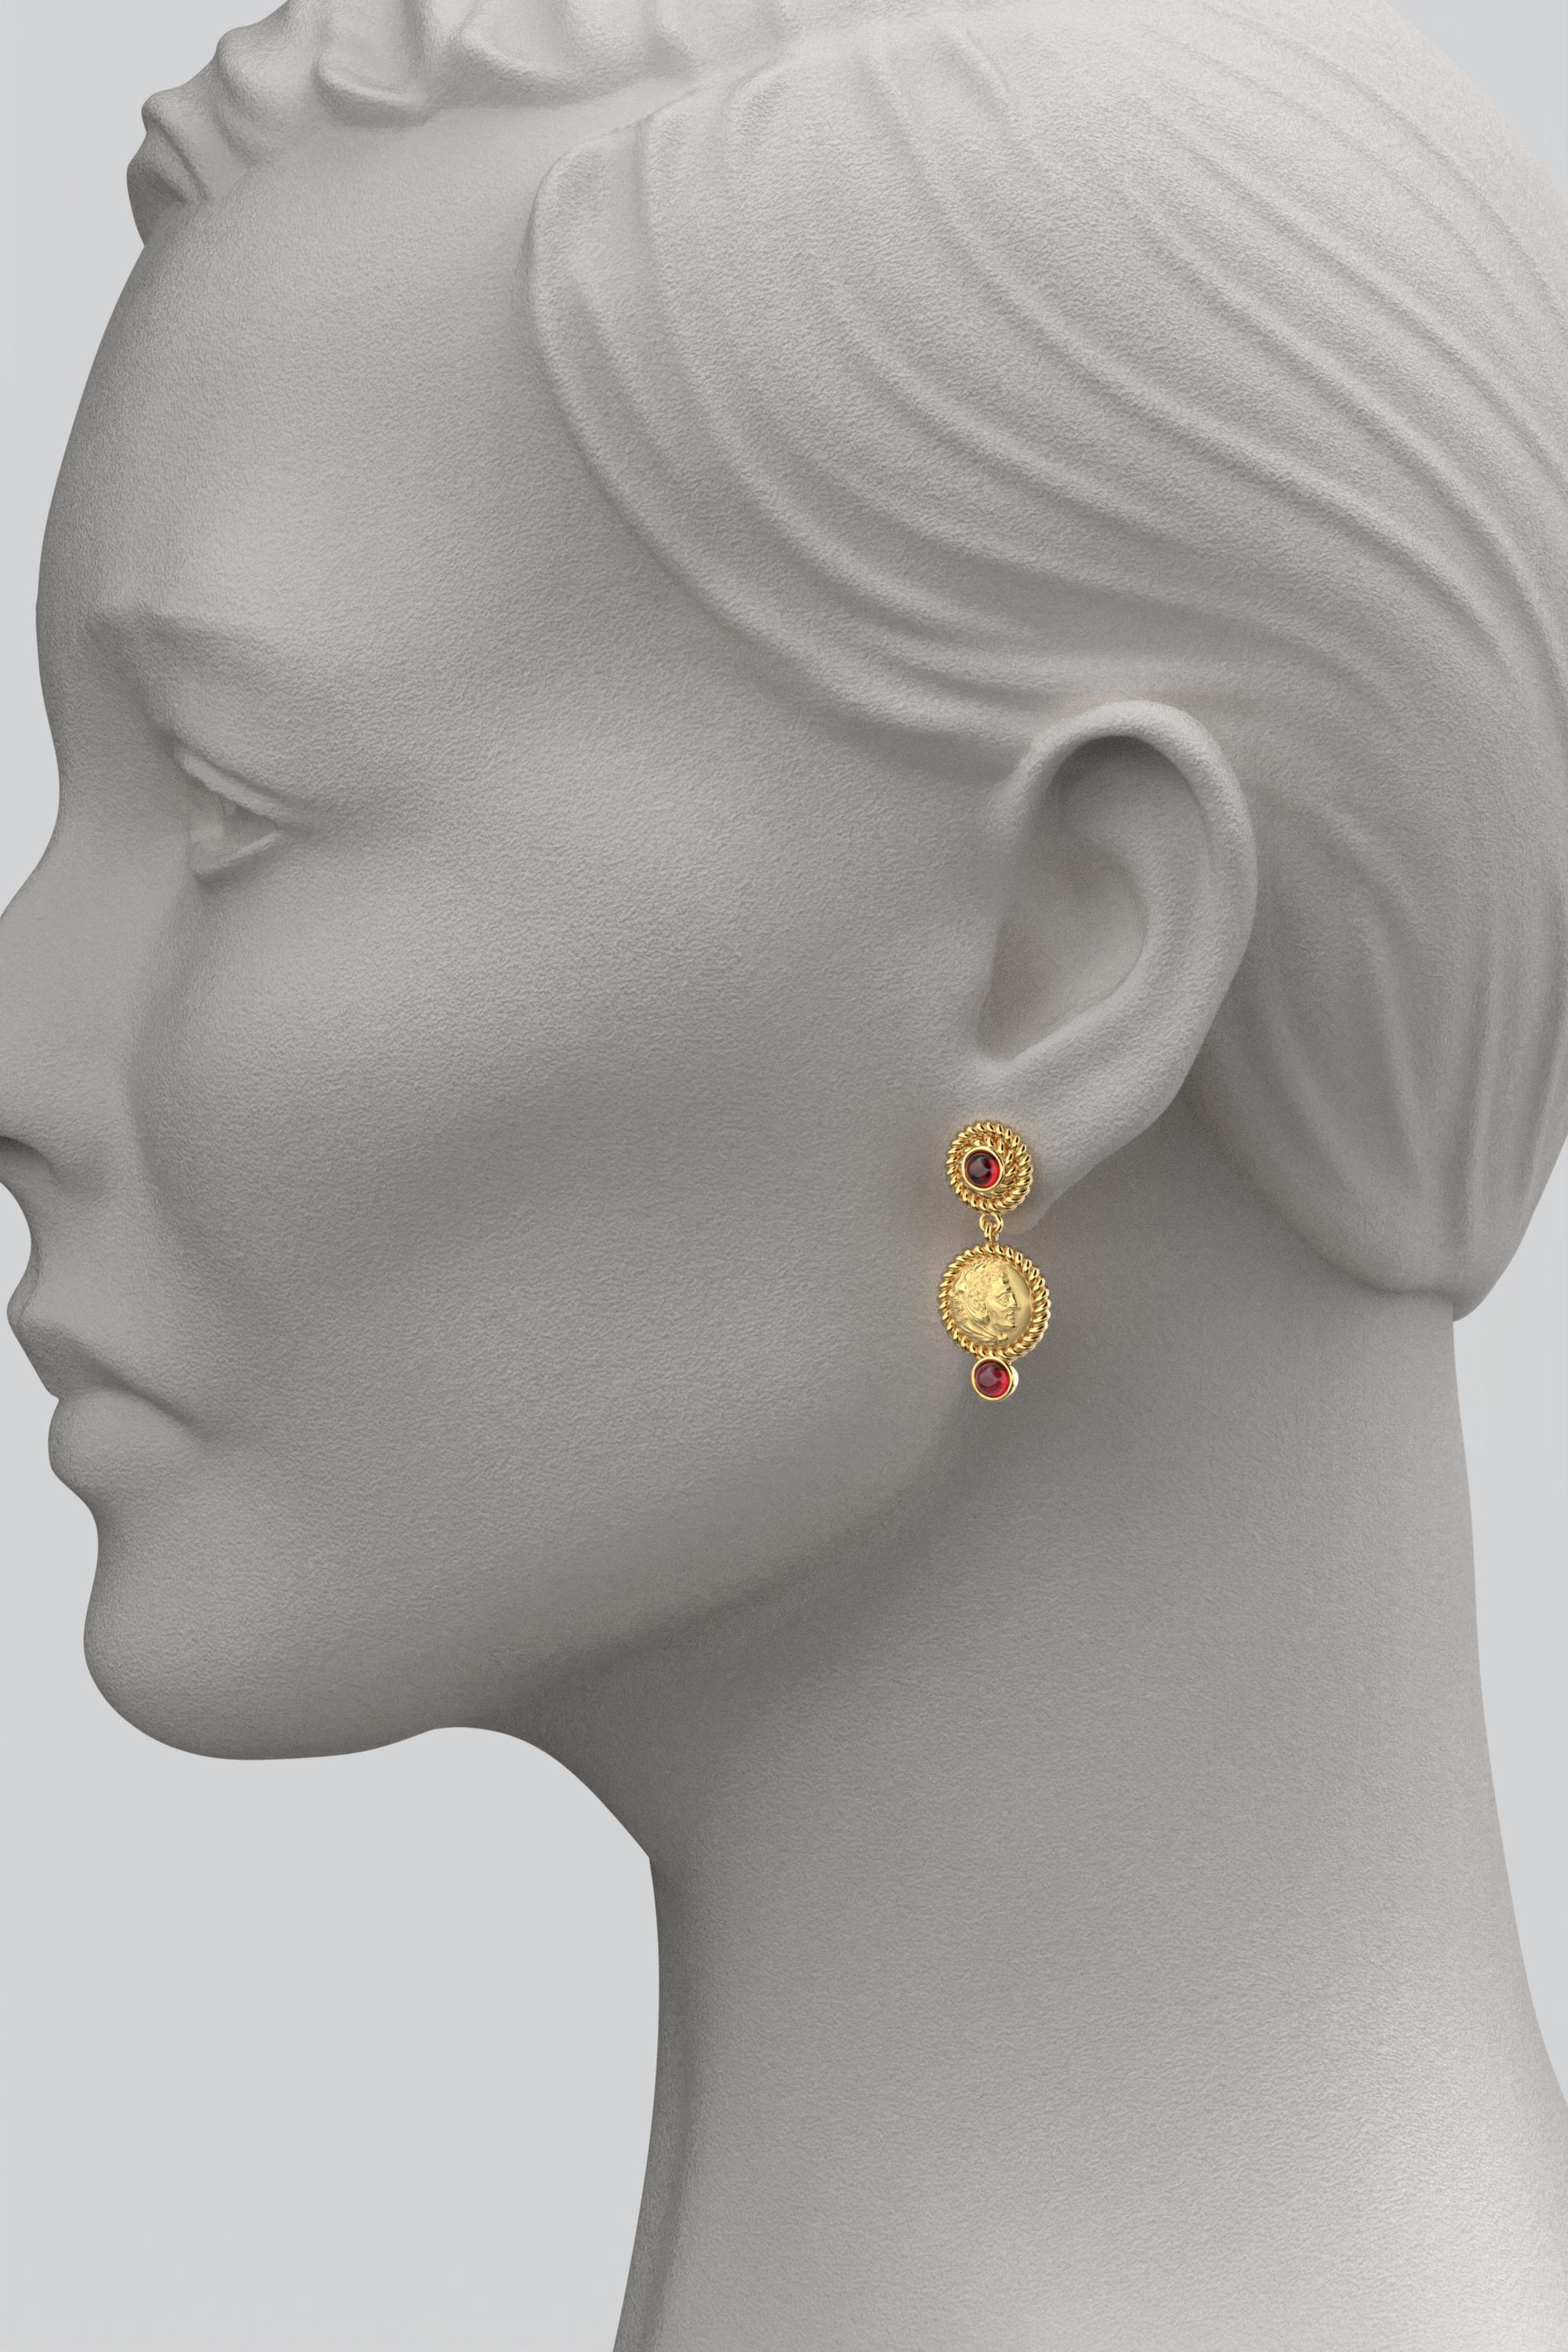 Cabochon 18k Gold Dangle Earrings in Ancient Greek Style | Italian Jewelry made in Italy For Sale